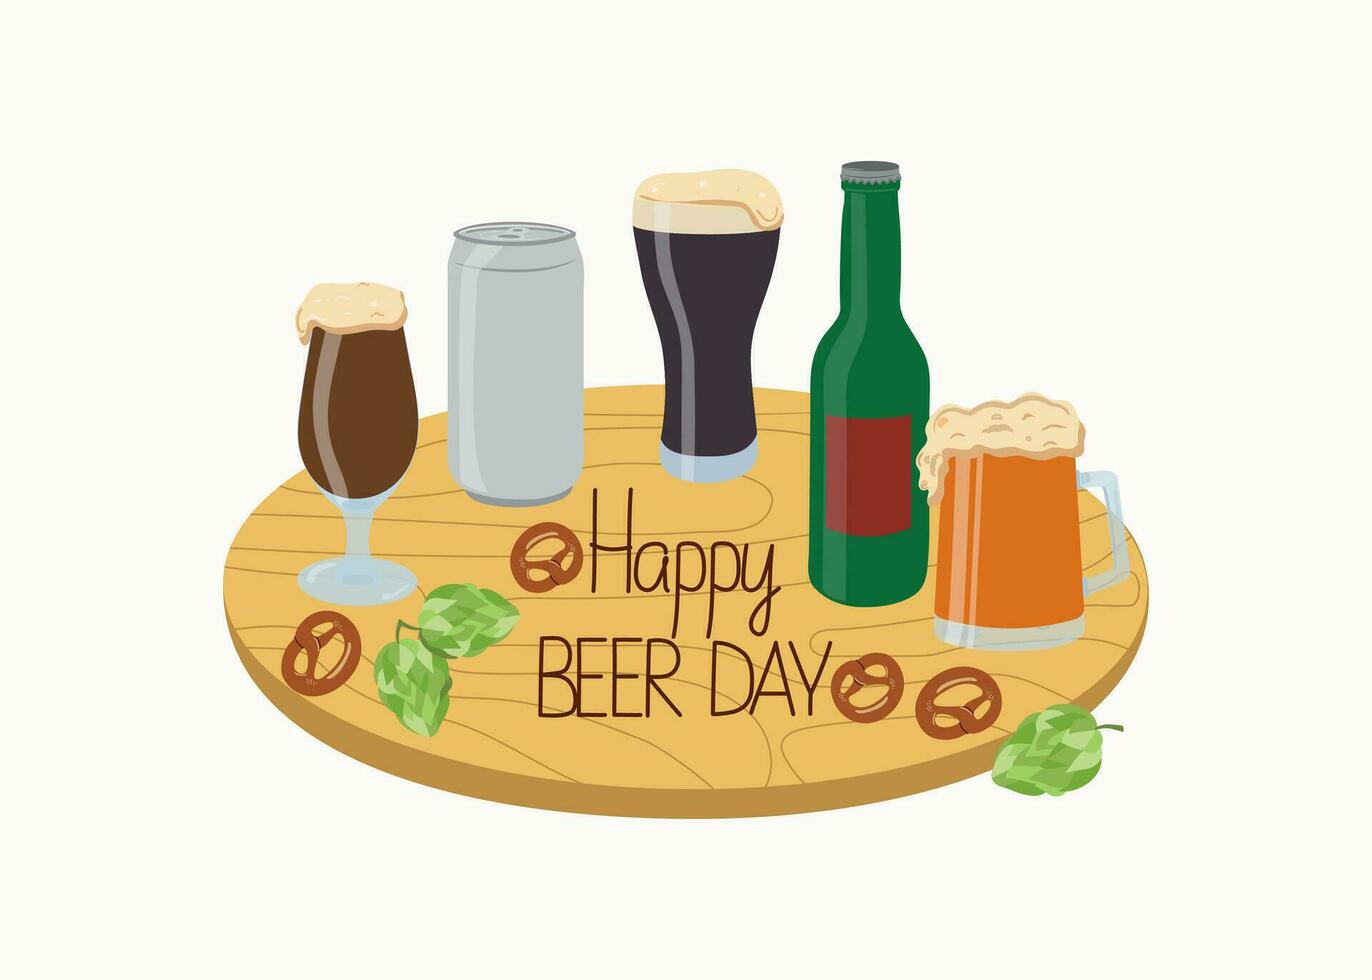 Beer day, festival, holiday. Octoberfest. Wooden sign with lettering decorated with beer items, beer in a bottle, can, mug. Hop cones. Vector illustration, background isolated.